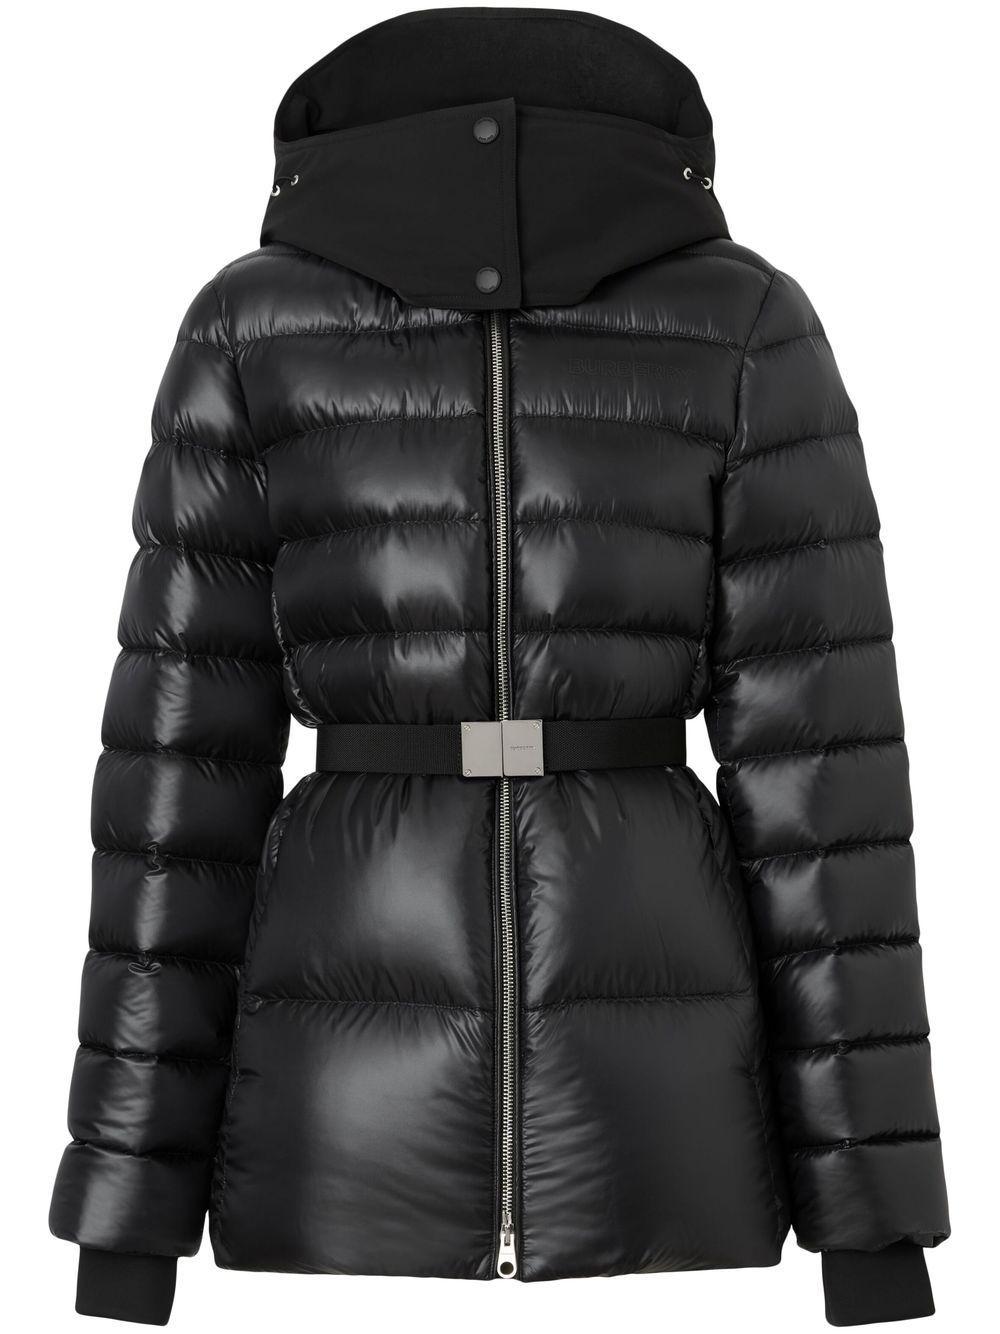 Burberry Contrast Hood Belted Puffer Jacket in Black - Save 41% | Lyst UK